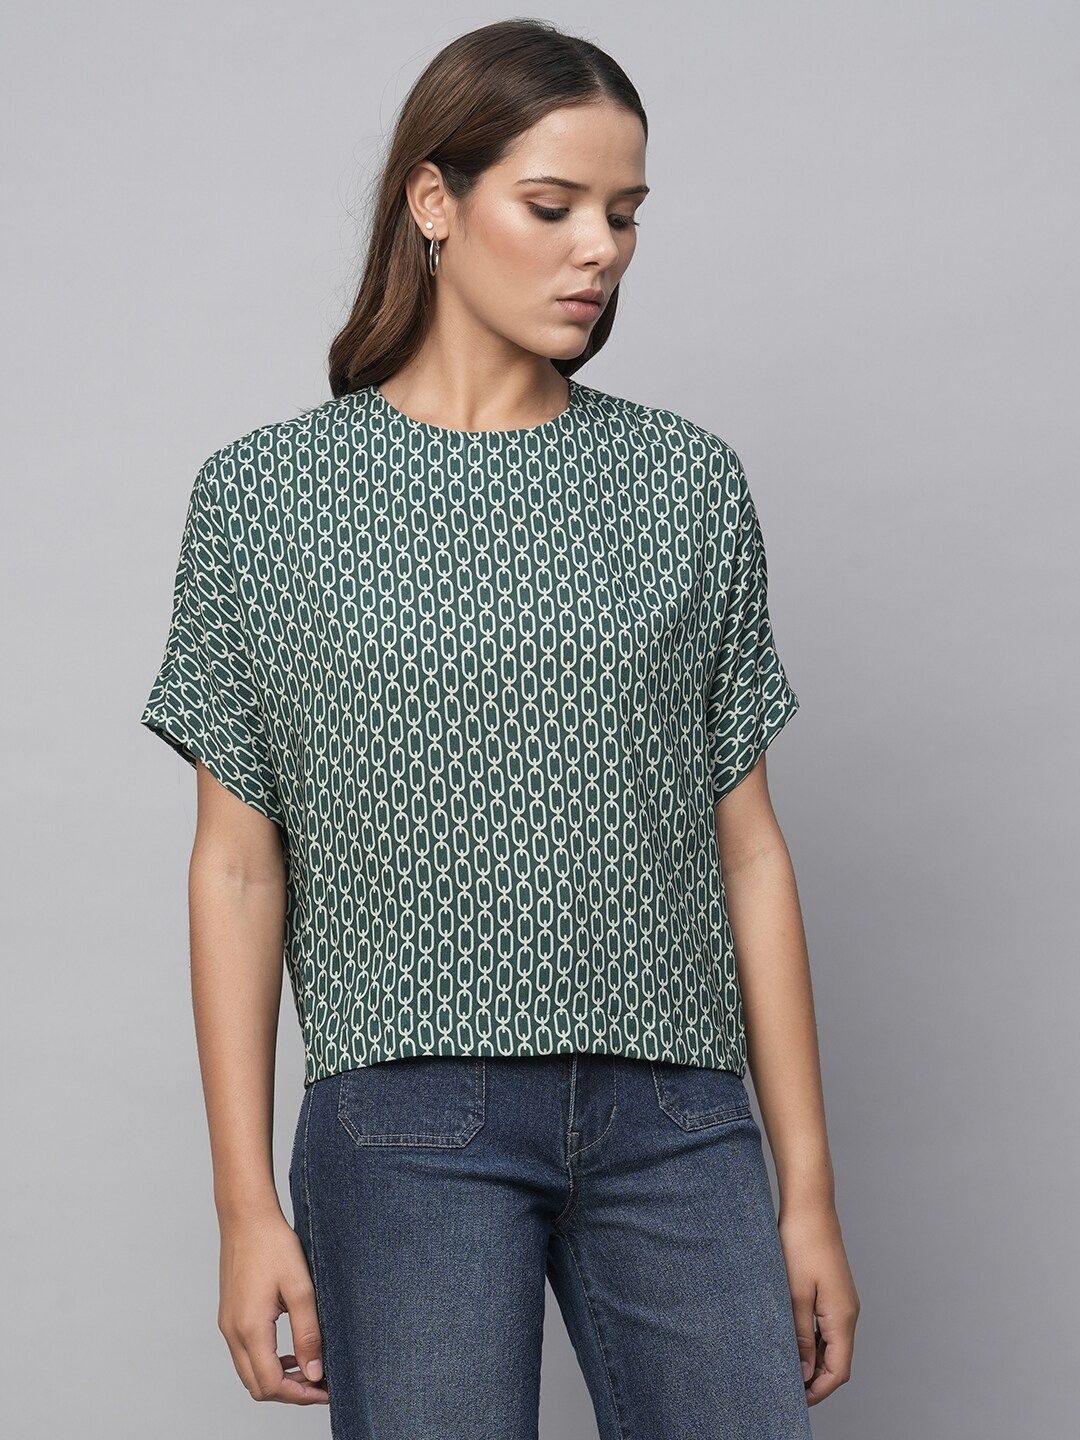 Chemistry Green Geometric Print Extended Sleeves Top Price in India